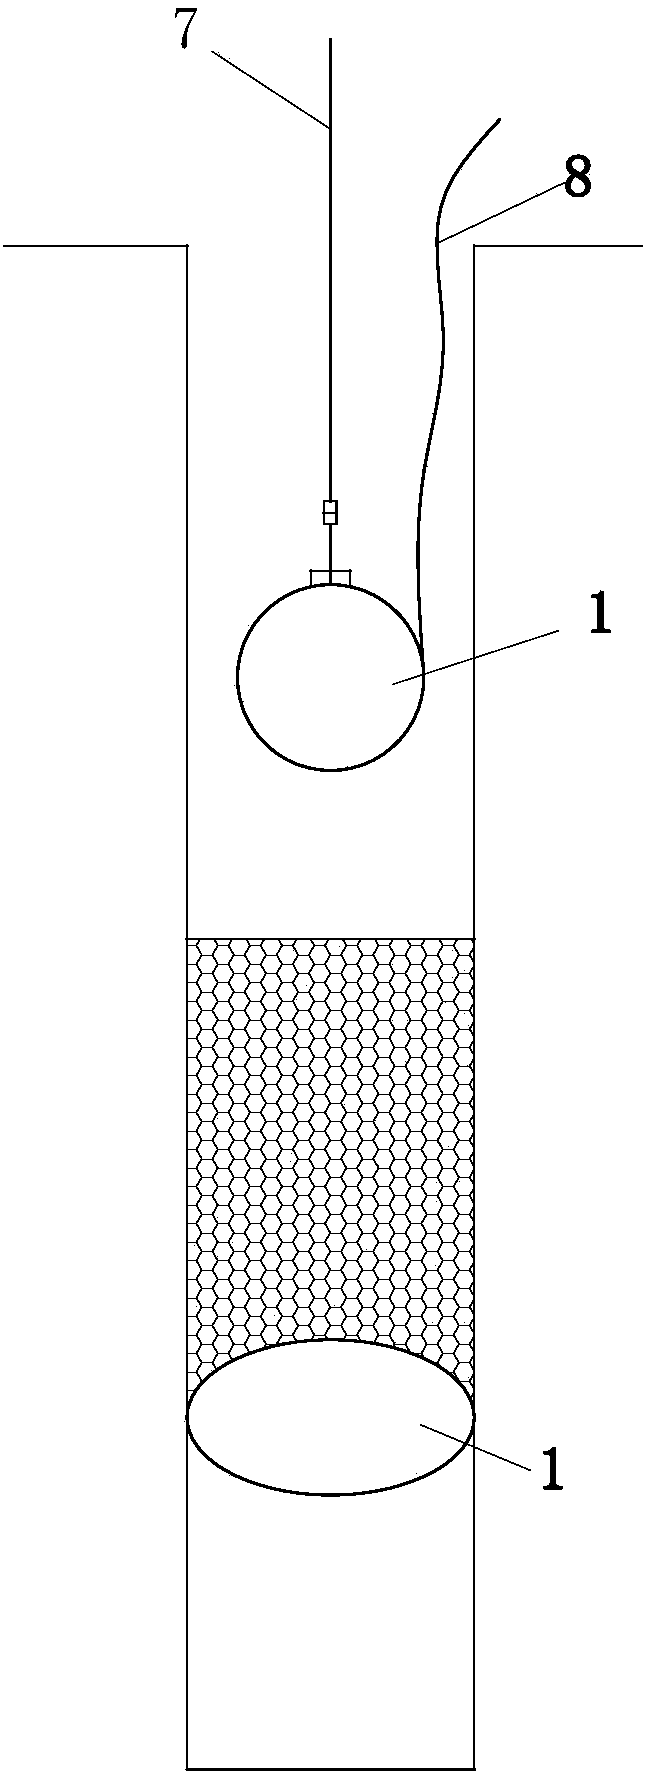 Blast hole spaced charging device for engineering blasting